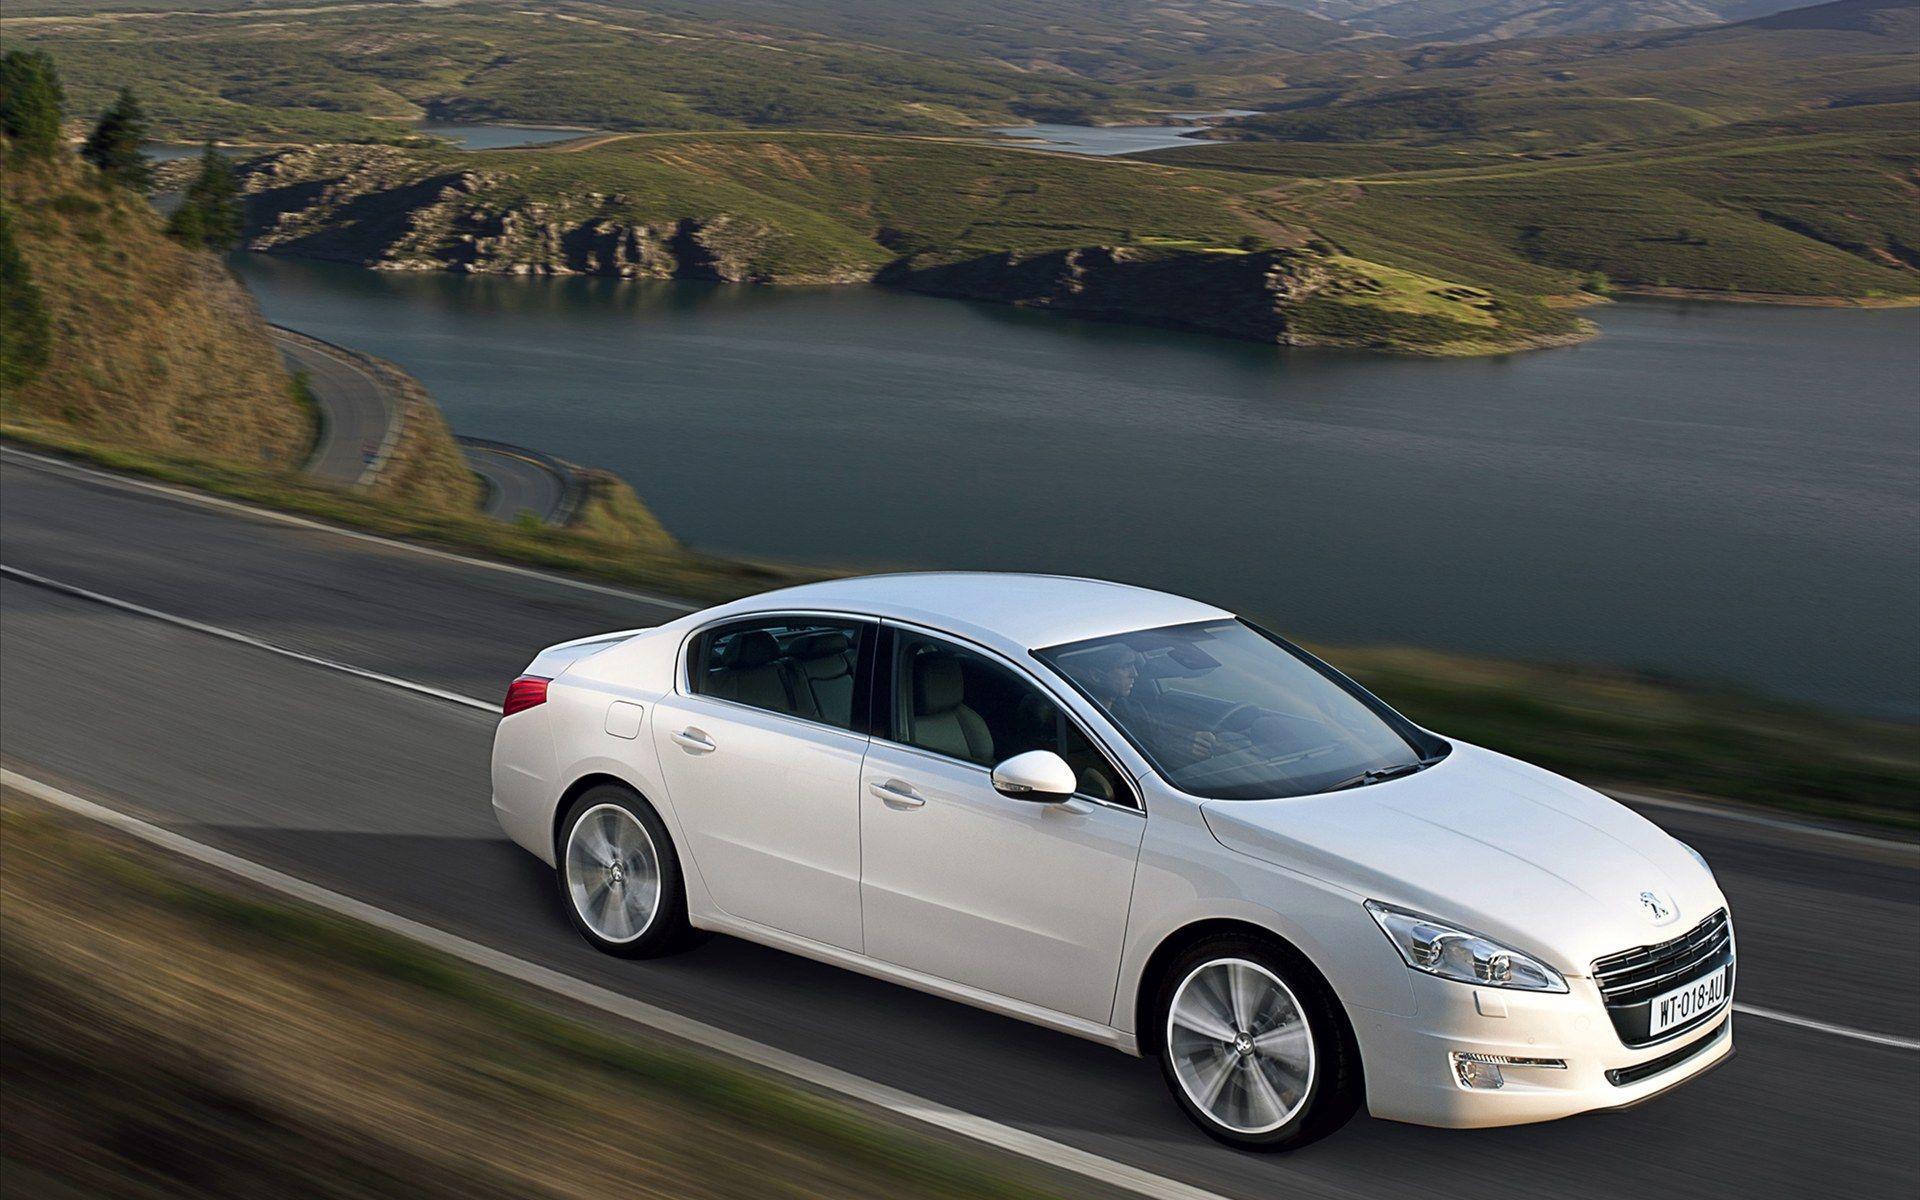 Peugeot 508. Free Desktop Wallpaper for Widescreen, HD and Mobile